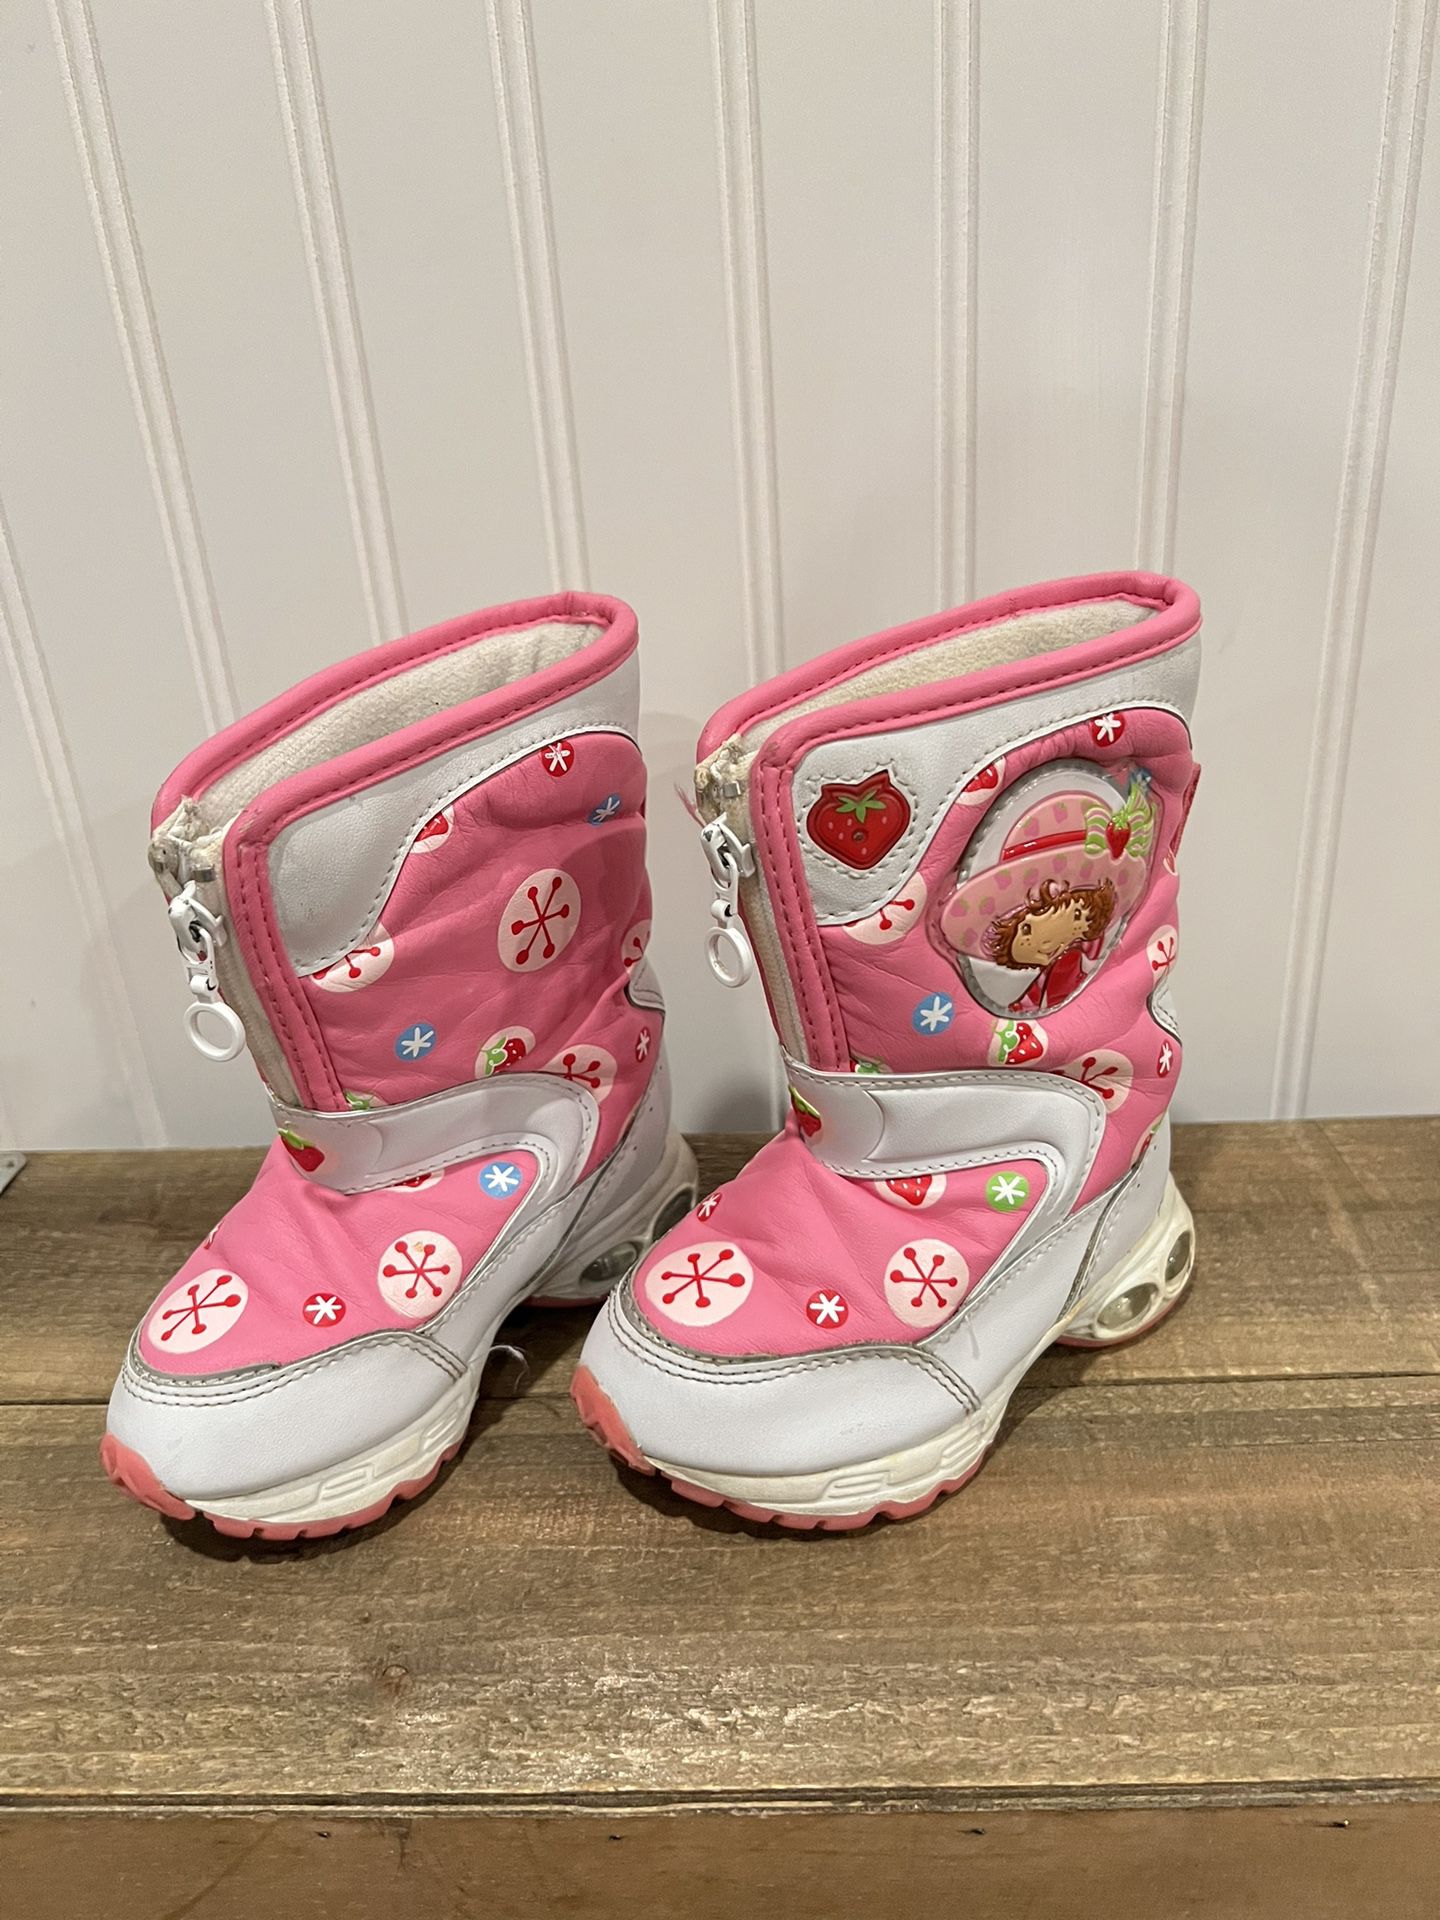 Vintage Strawberry Shortcake snow boots toddlers  girls size 3 2003 